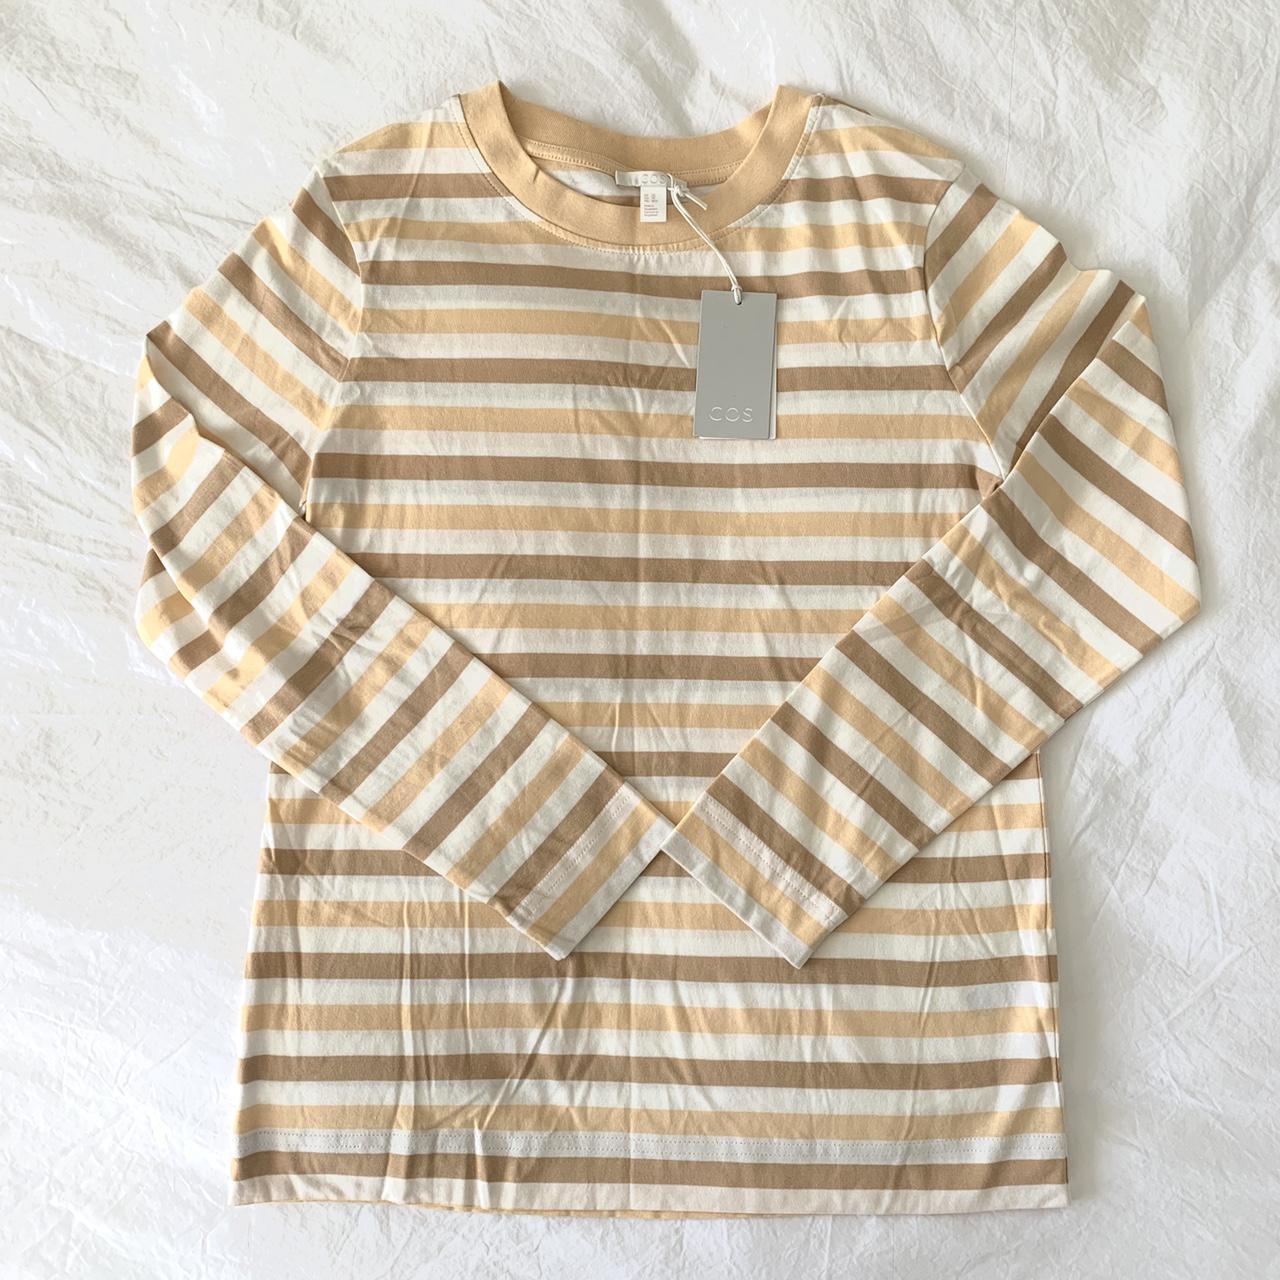 The $35 Everyday Casual Top